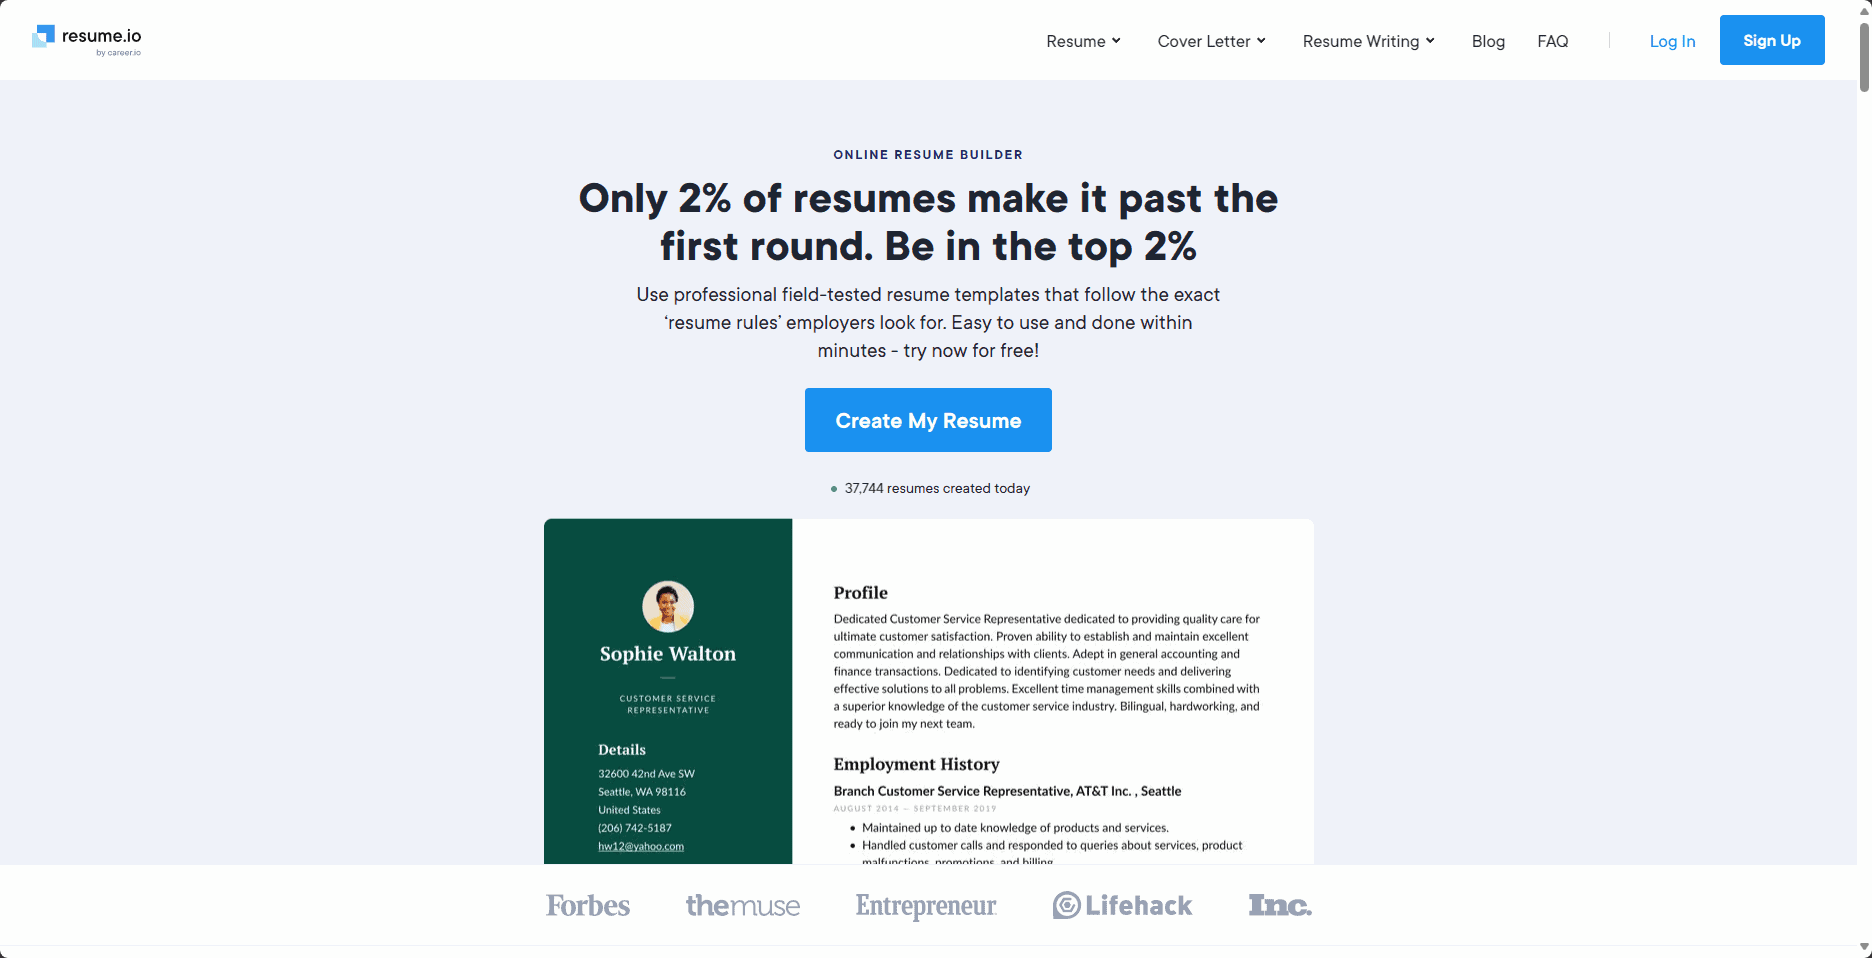 Resume.io download page